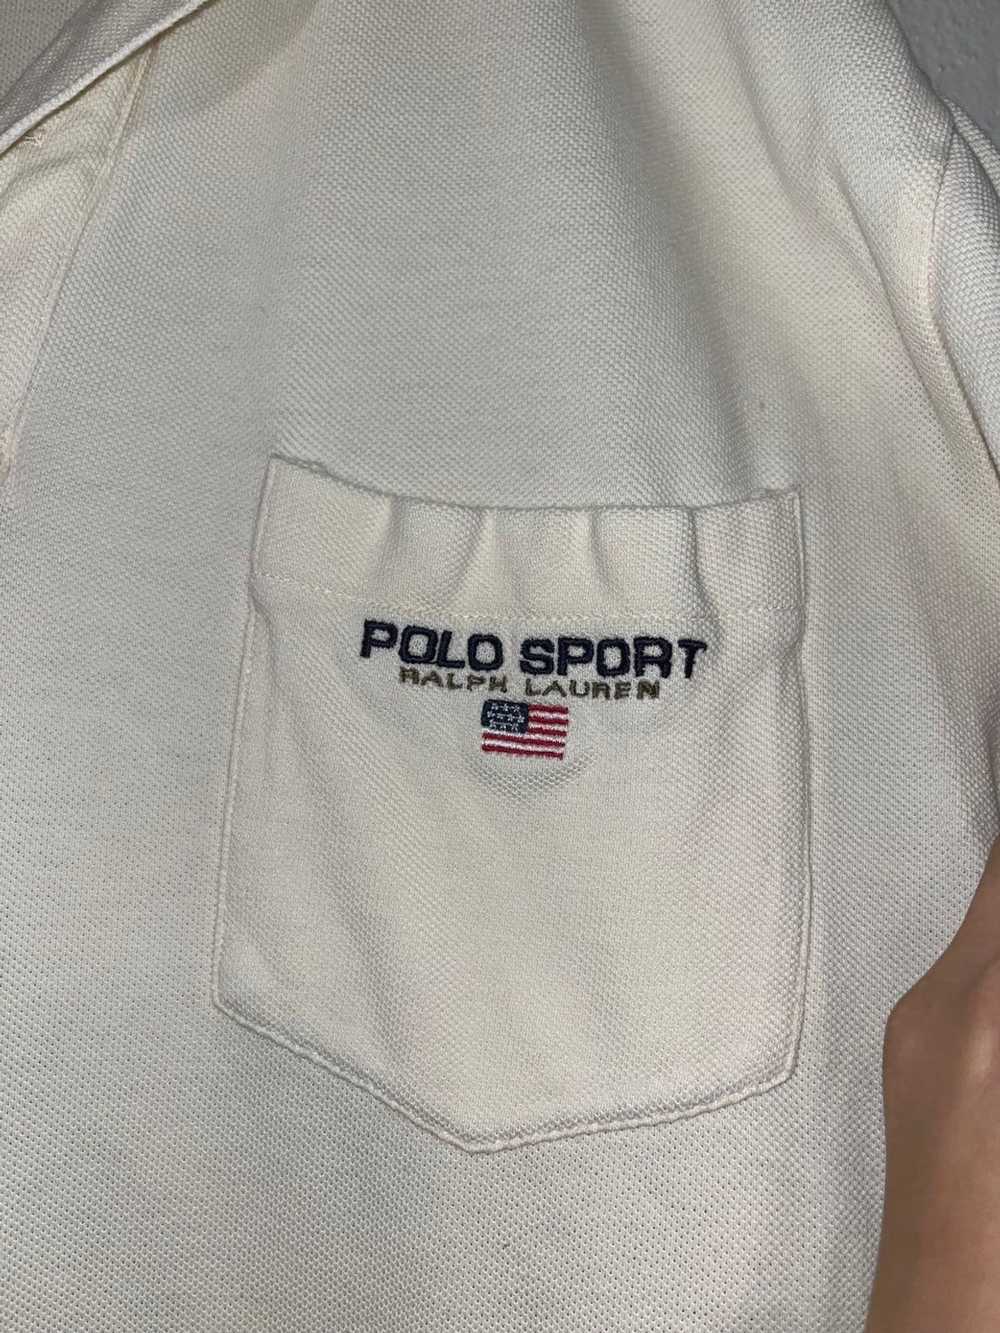 Polo Ralph Lauren Vintage Embroidered Polo Sport - image 2